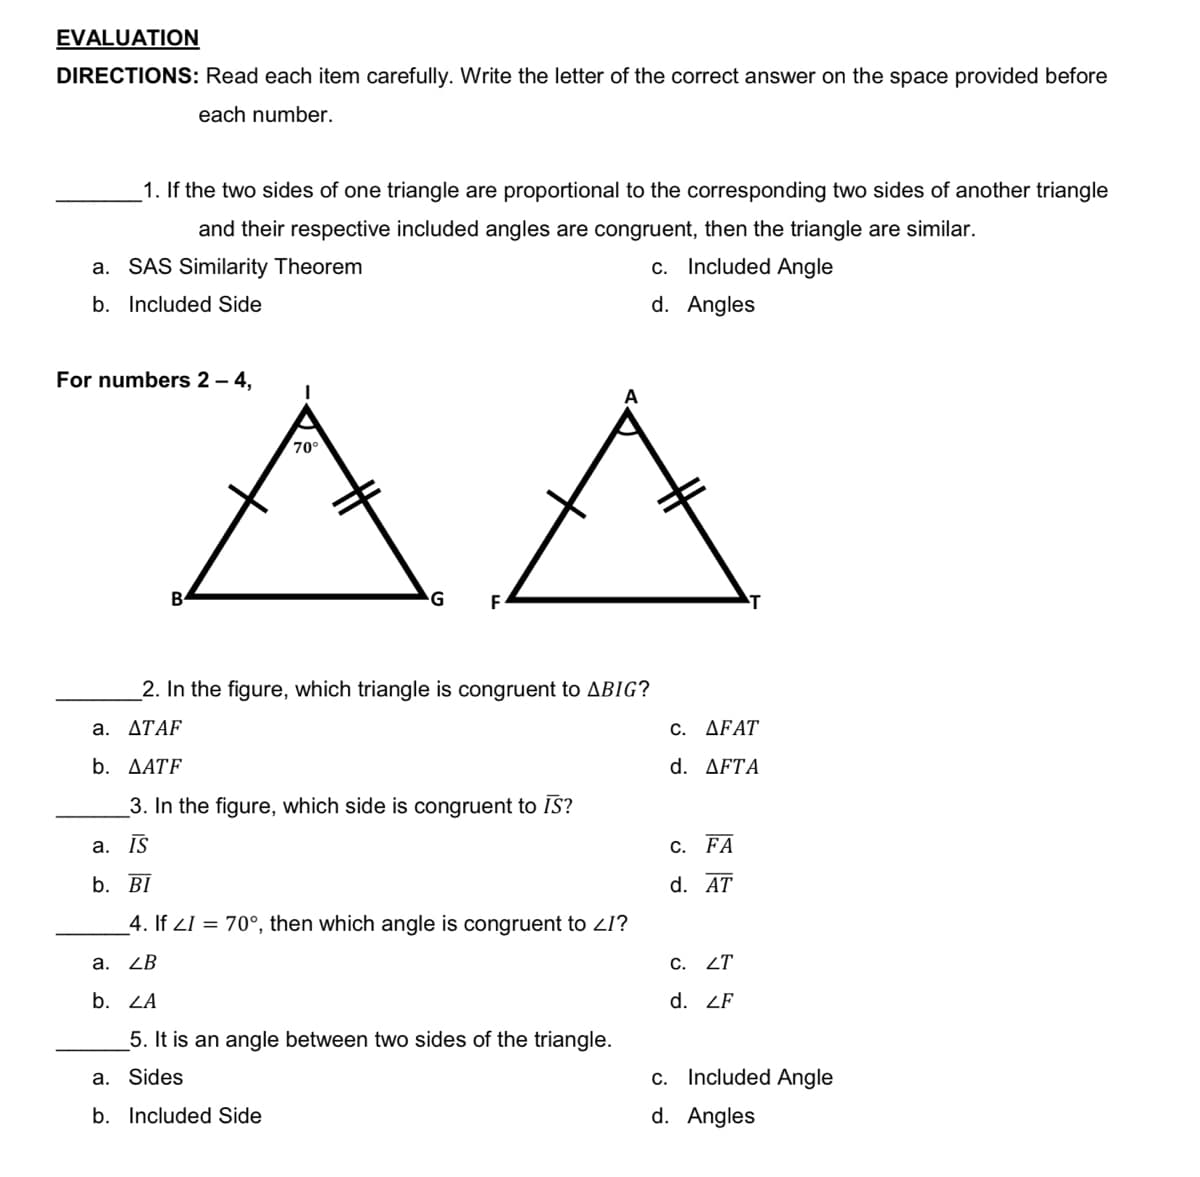 EVALUATION
DIRECTIONS: Read each item carefully. Write the letter of the correct answer on the space provided before
each number.
1. If the two sides of one triangle are proportional to the corresponding two sides of another triangle
and their respective included angles are congruent, then the triangle are similar.
a. SAS Similarity Theorem
c. Included Angle
b. Included Side
d. Angles
AA
For numbers 2 – 4,
70°
G
F
2. In the figure, which triangle is congruent to ABIG?
a. ΔΤΑF
C. ΔFAΤ
b. AATF
d. ΔFTΑ
_3. In the figure, which side is congruent to IS?
а. IS
С. FA
b. BĪ
d. AT
_4. If ZI = 70°, then which angle is congruent to ZI?
a. ZB
C. ZT
b. ZA
d. ZF
5. It is an angle between two sides of the triangle.
a. Sides
c. Included Angle
b. Included Side
d. Angles
